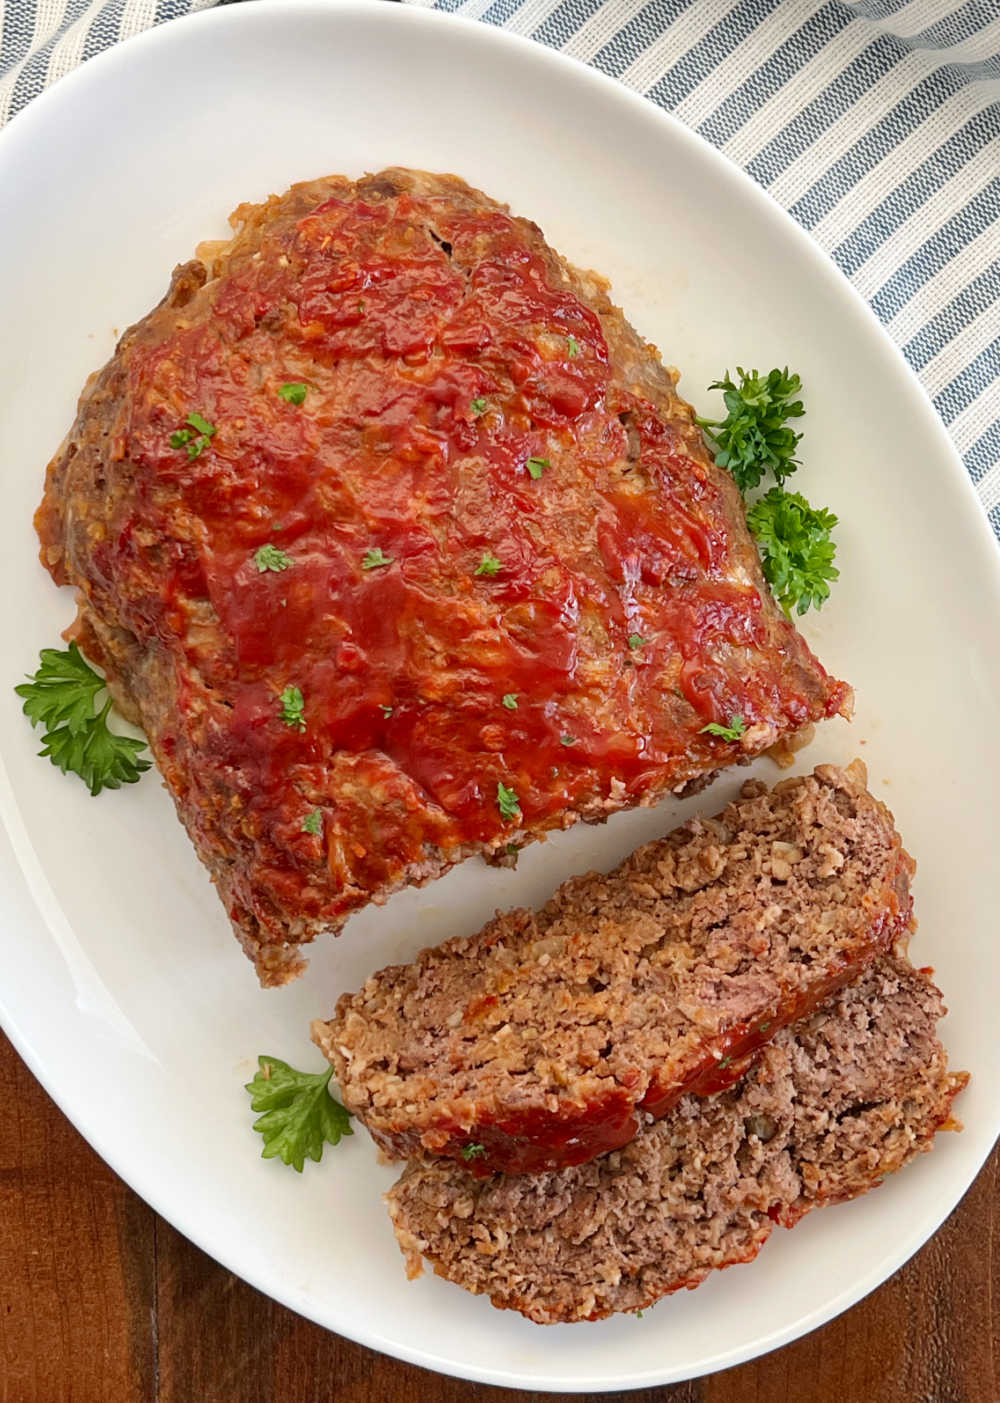 meatloaf with ketchup glaze and parsley on serving plate.